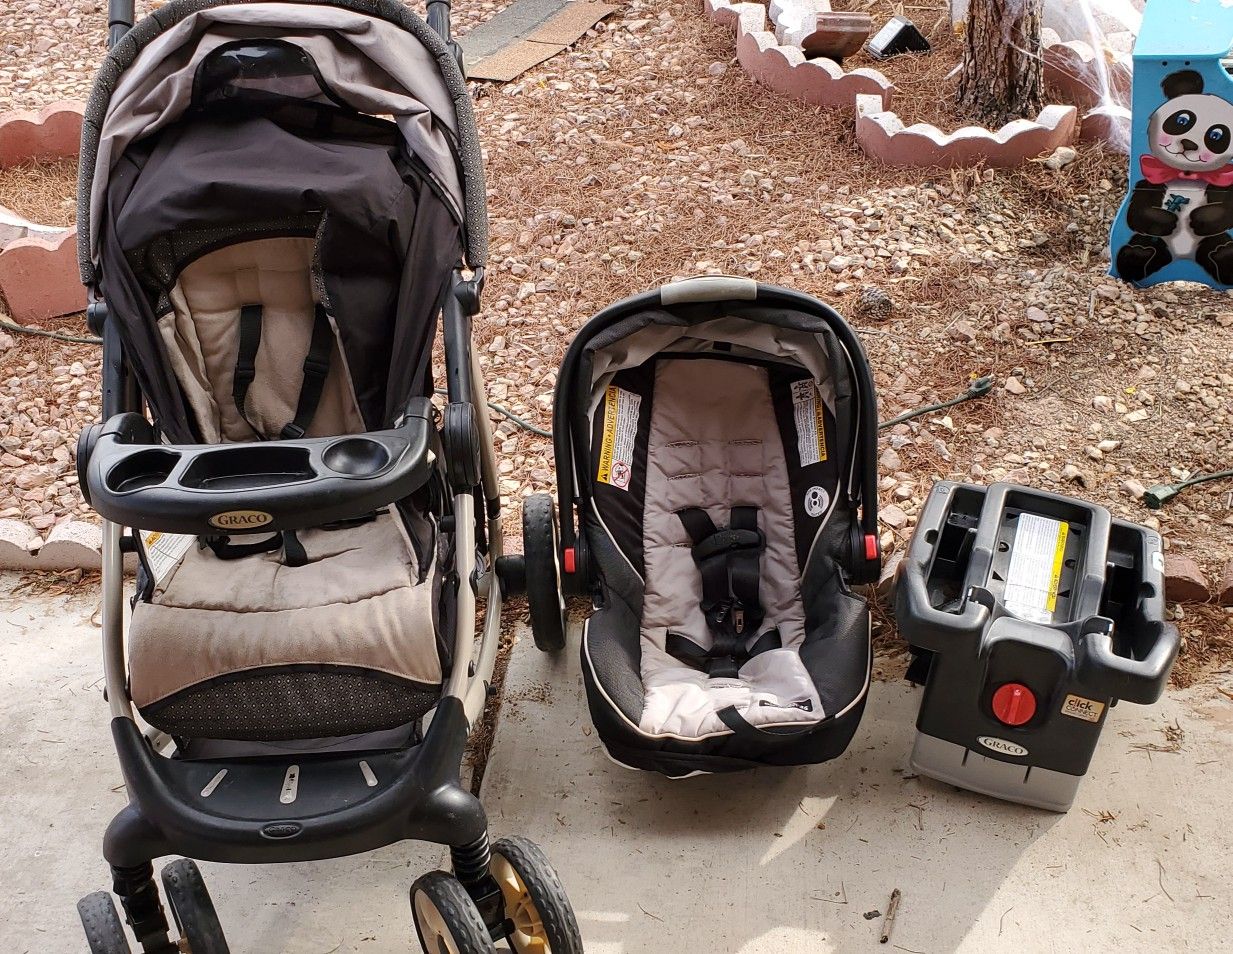 Stroller carseat combo